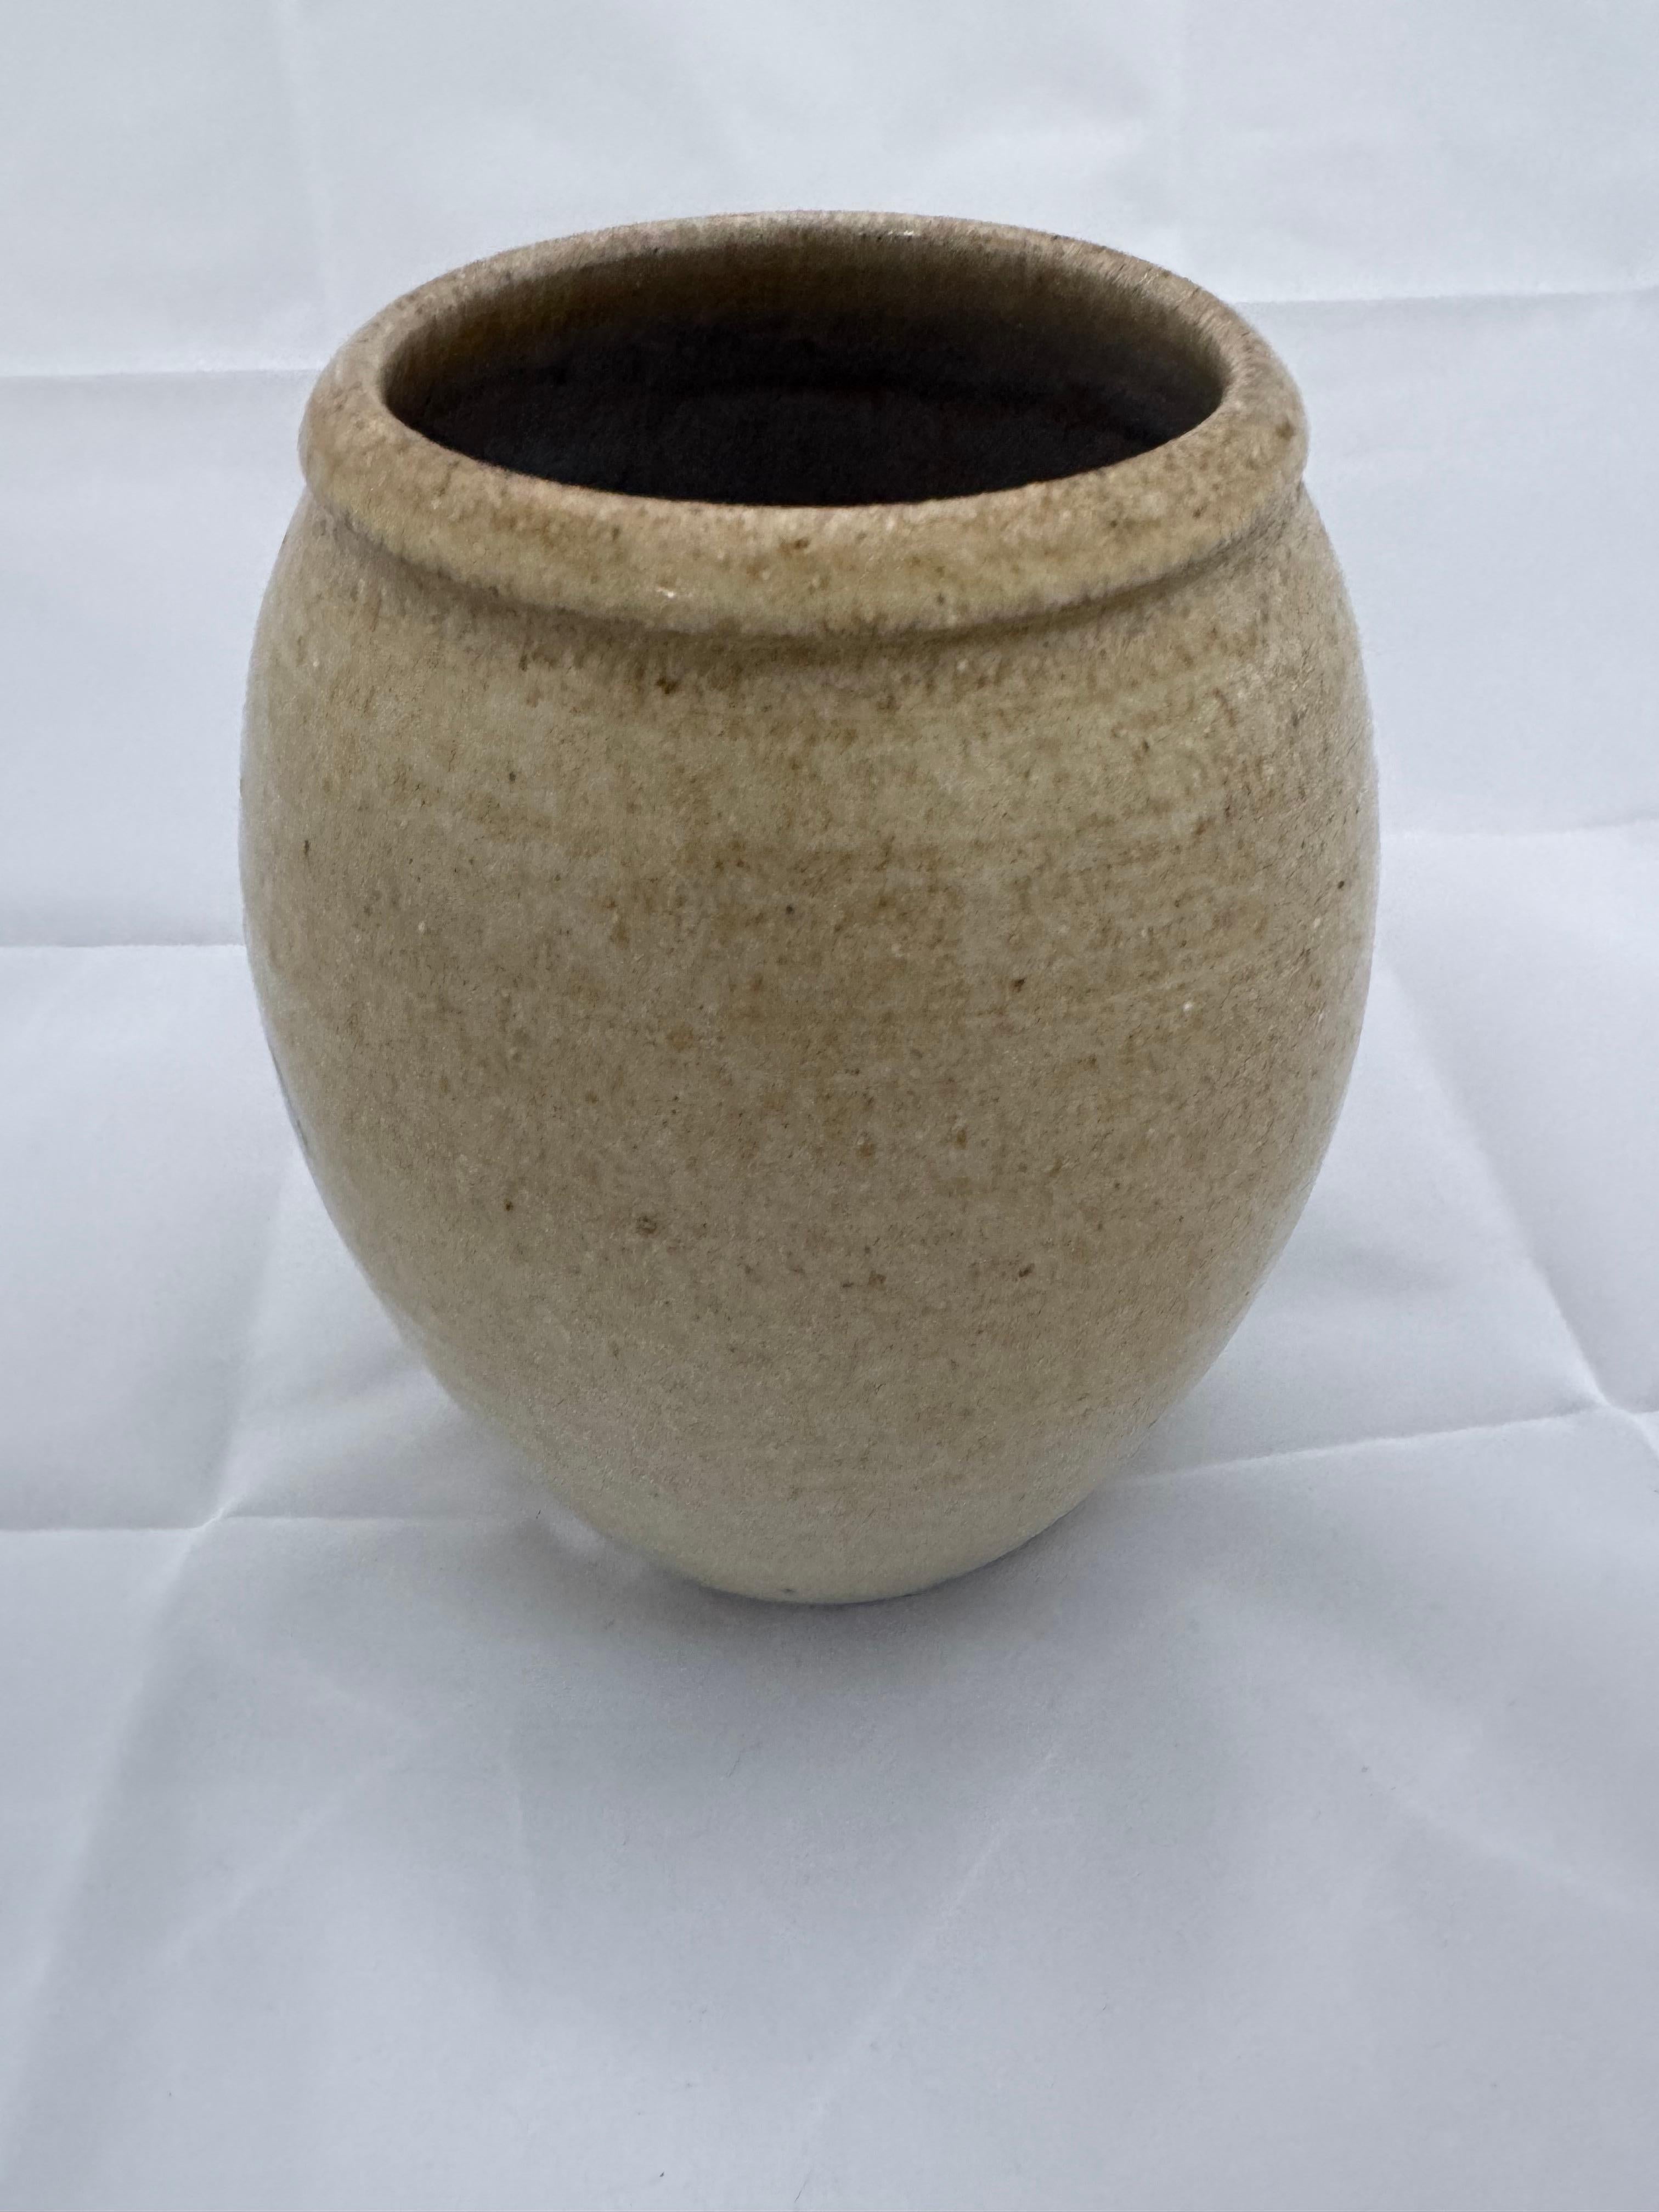 Nice pottery vase for your collection